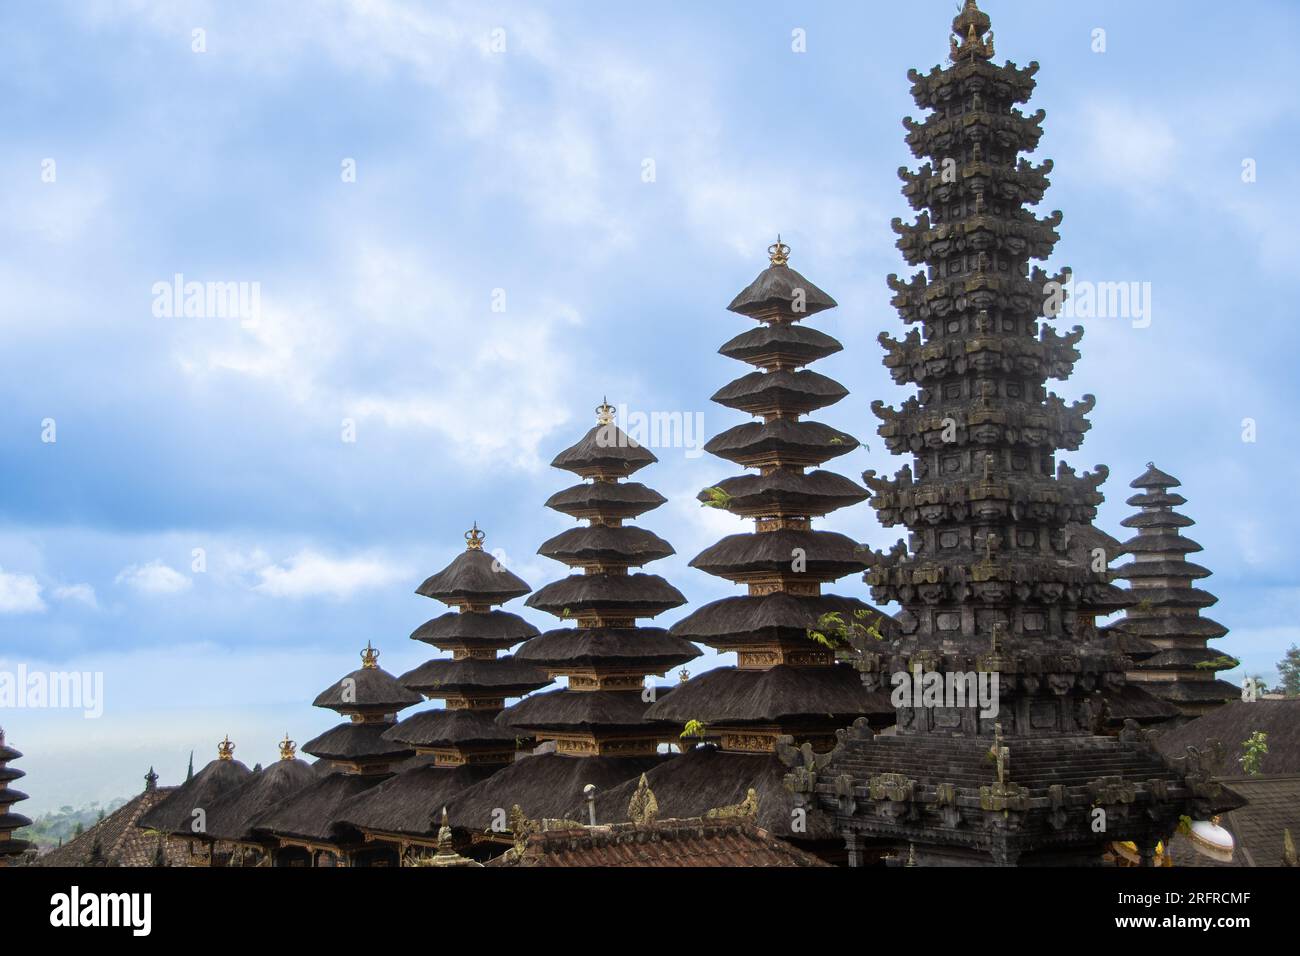 The view over the roofs of Balinese shrines in the 'Pura Besakih' temple Stock Photo